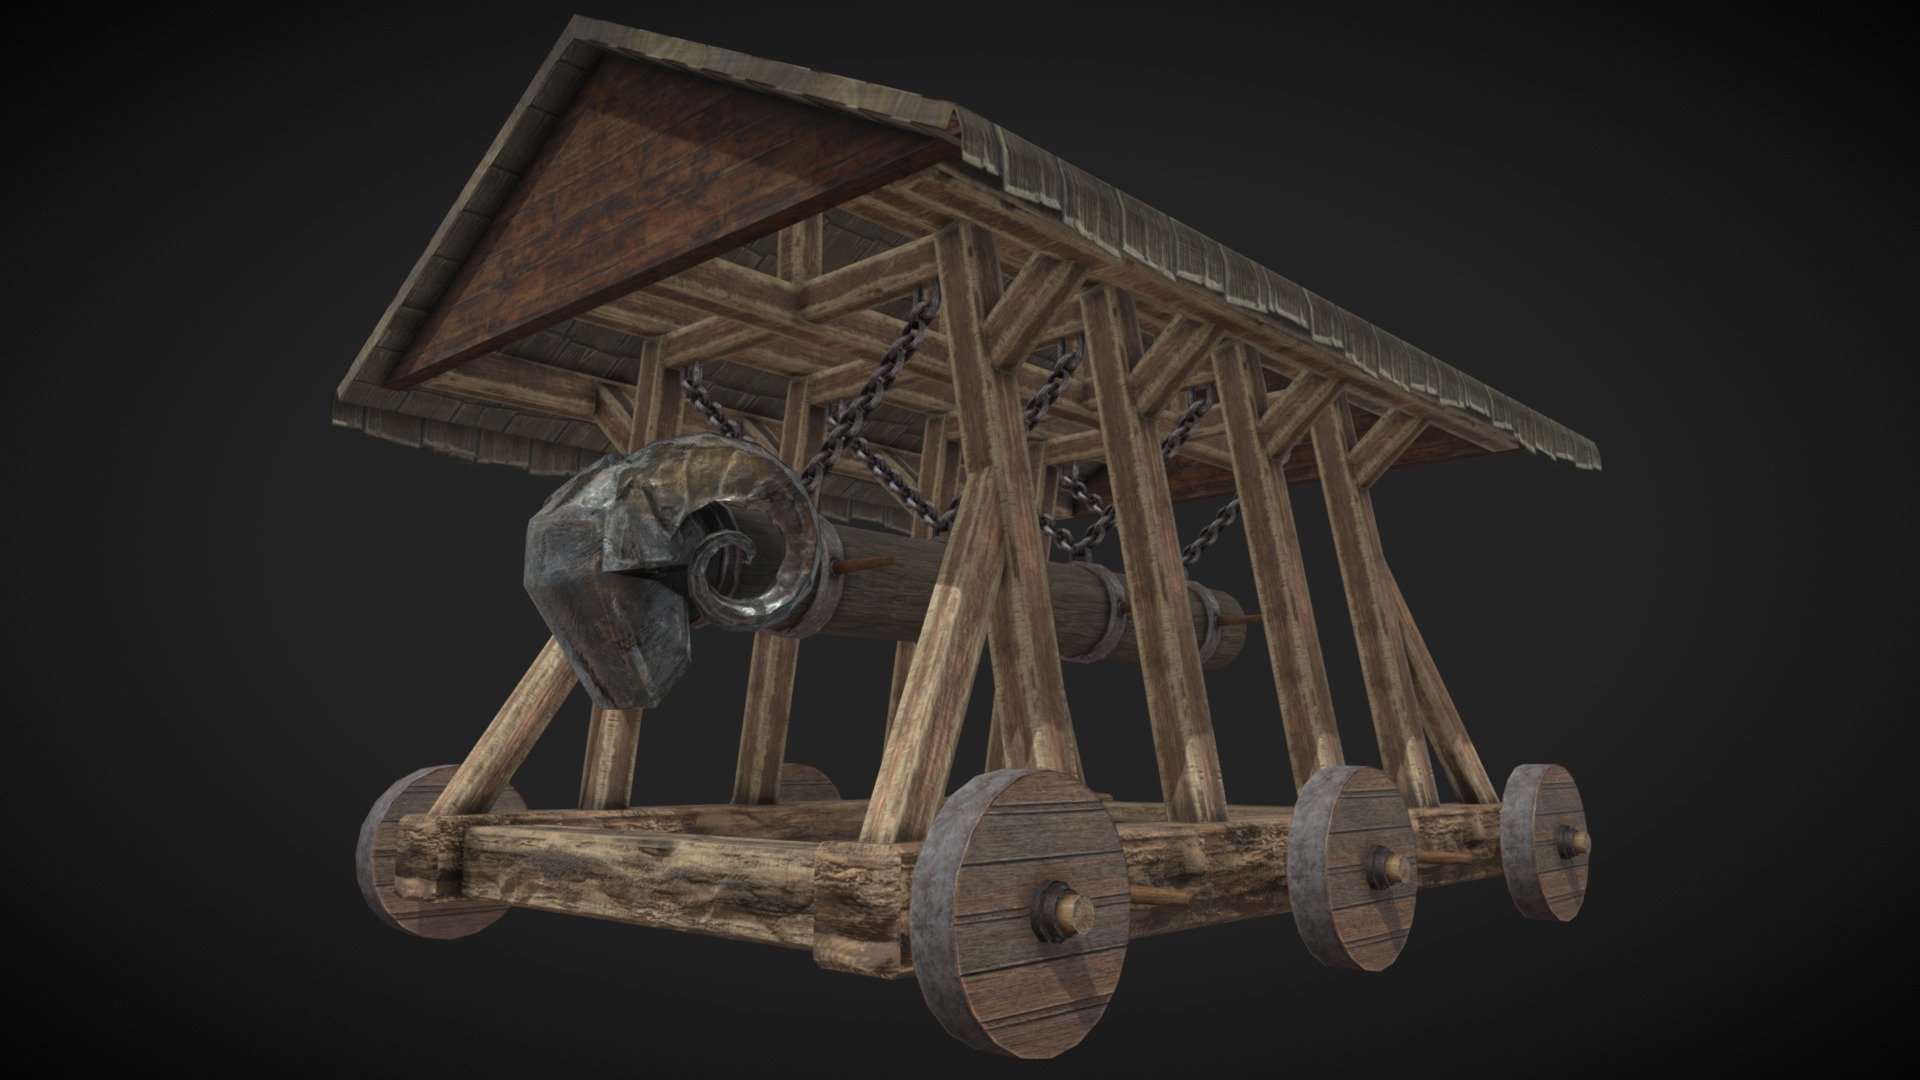 Medieval ram 3D model with a low poly mesh. The model is suitable for games, scenes and rendering. The model can be animated, all moving parts are separate. There are 2 textures on the ram and on the wheels in the file 3d model